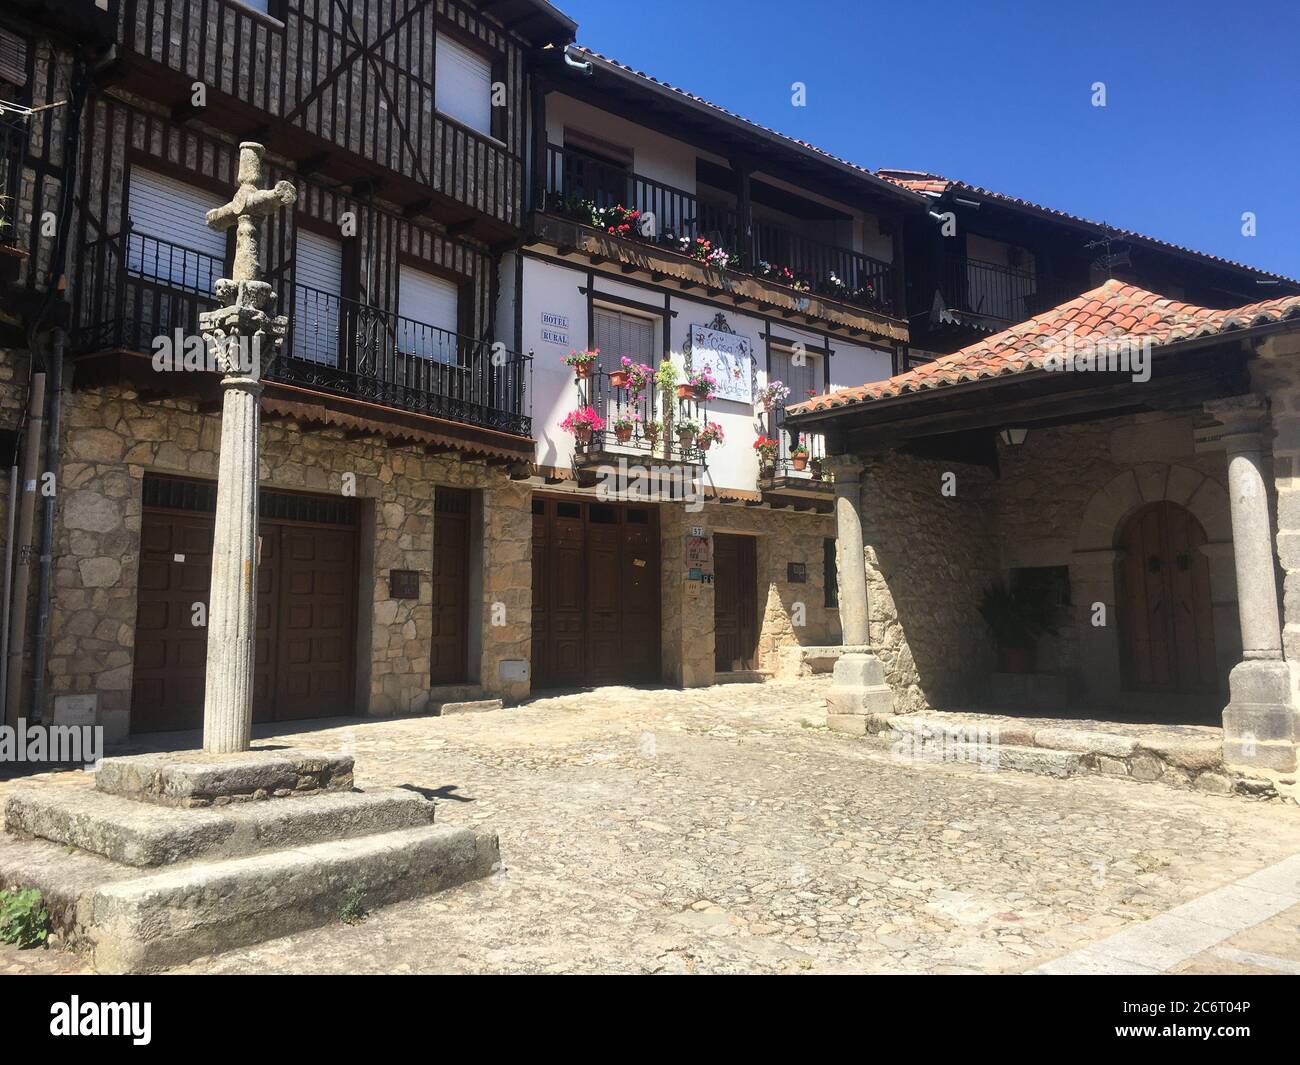 Mogarraz, a town called a historical and artistic complex, located in the heart of the Las Batuecas and Sierra de Francia Natural Park Stock Photo